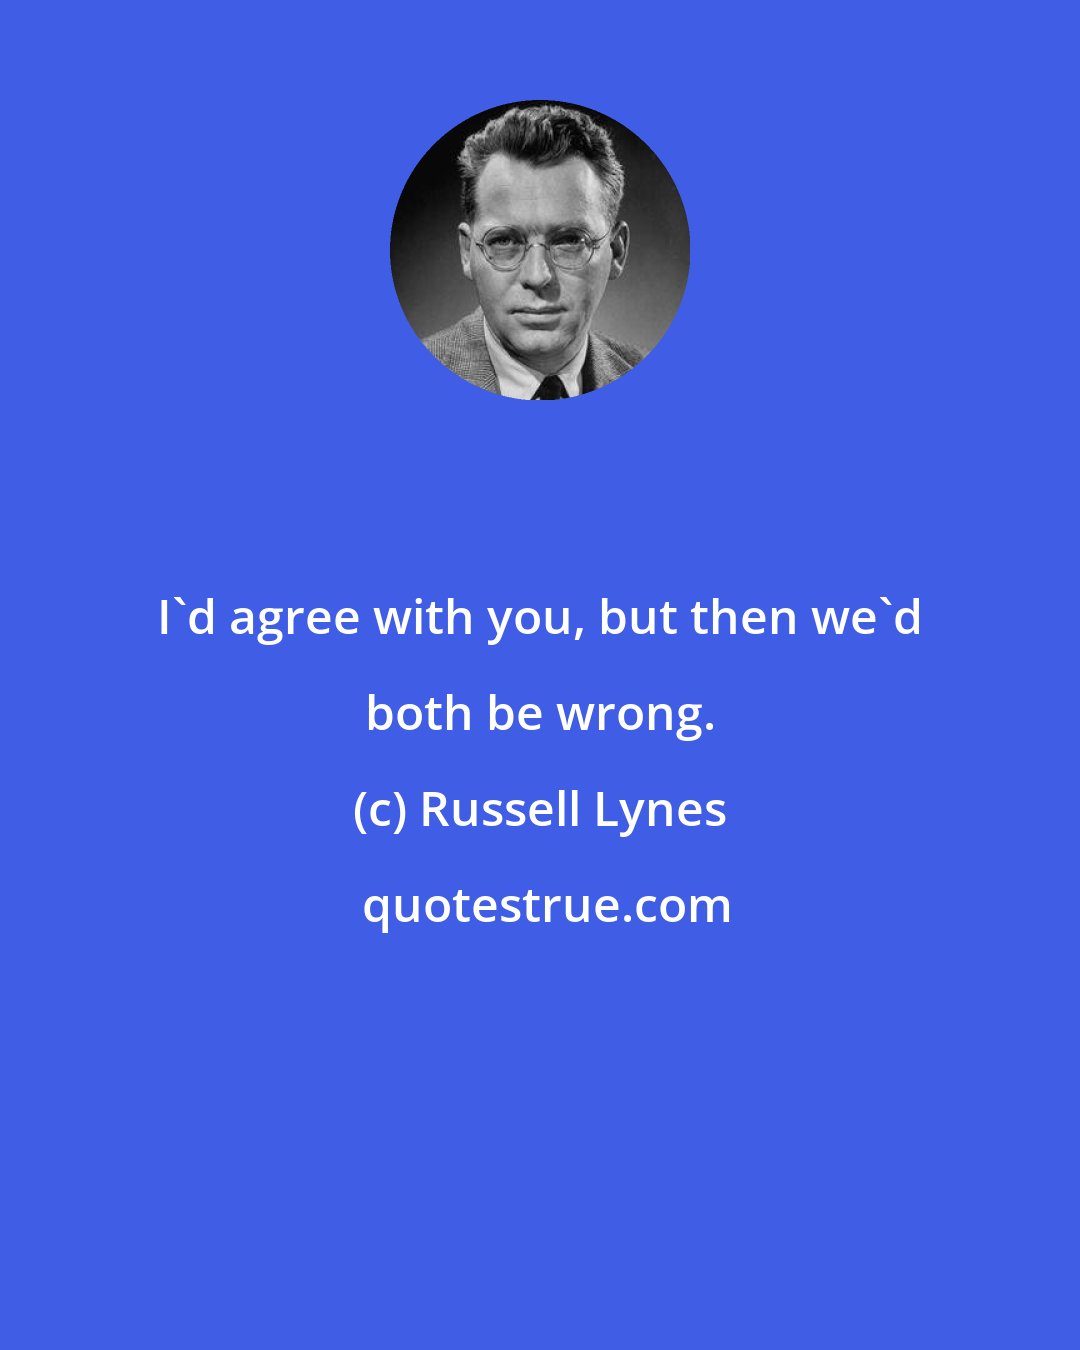 Russell Lynes: I'd agree with you, but then we'd both be wrong.